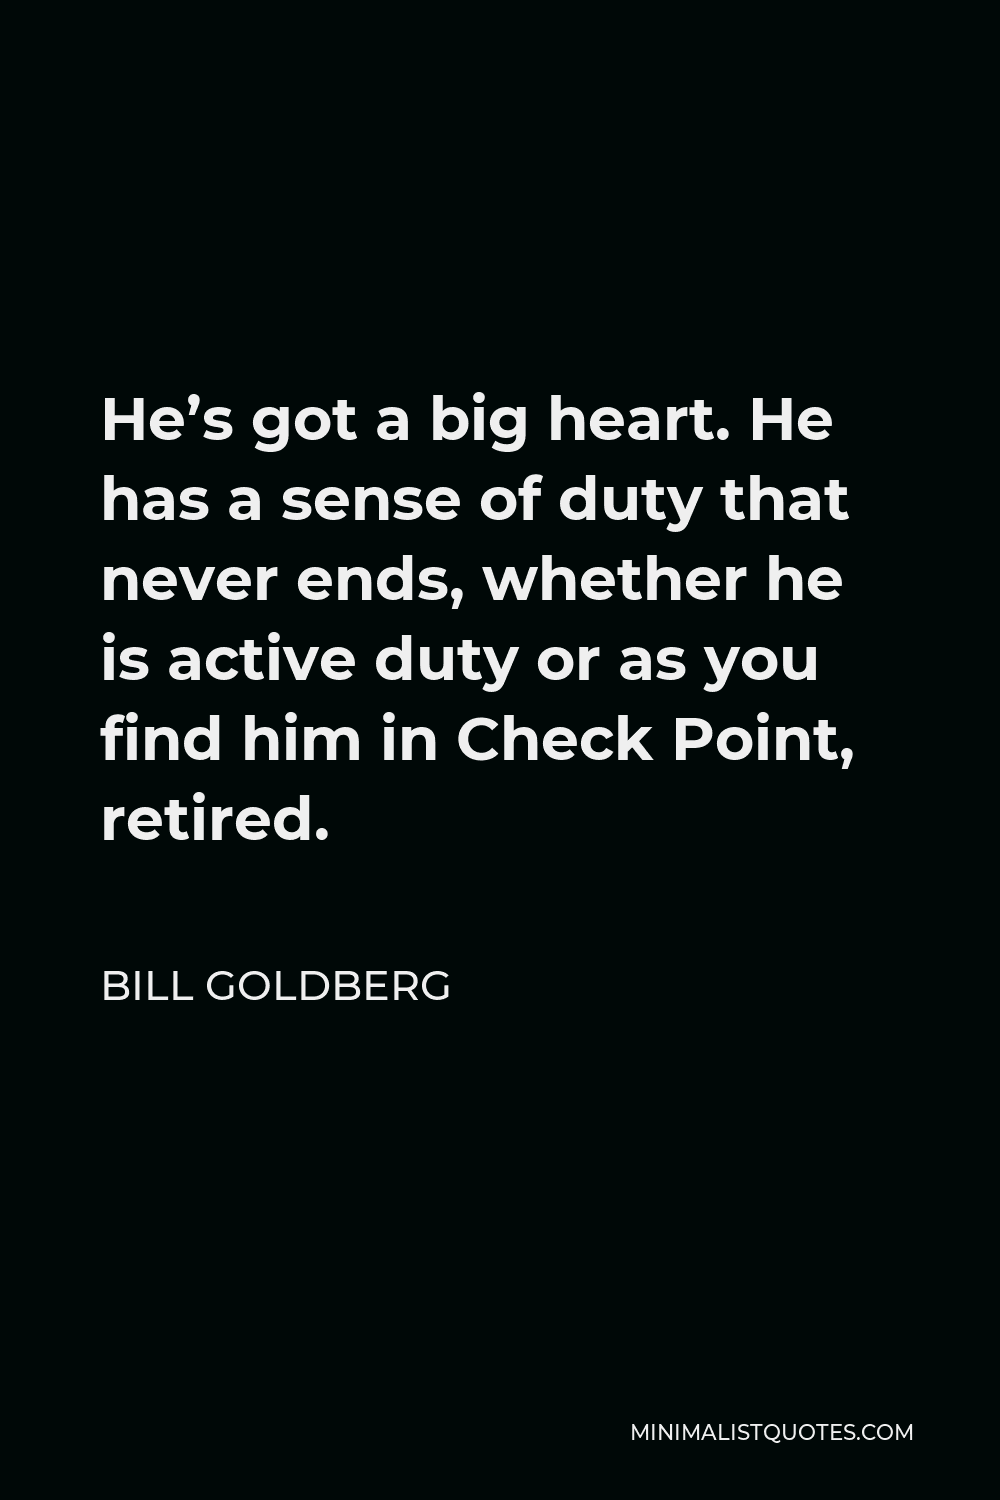 Bill Goldberg Quote - He’s got a big heart. He has a sense of duty that never ends, whether he is active duty or as you find him in Check Point, retired.